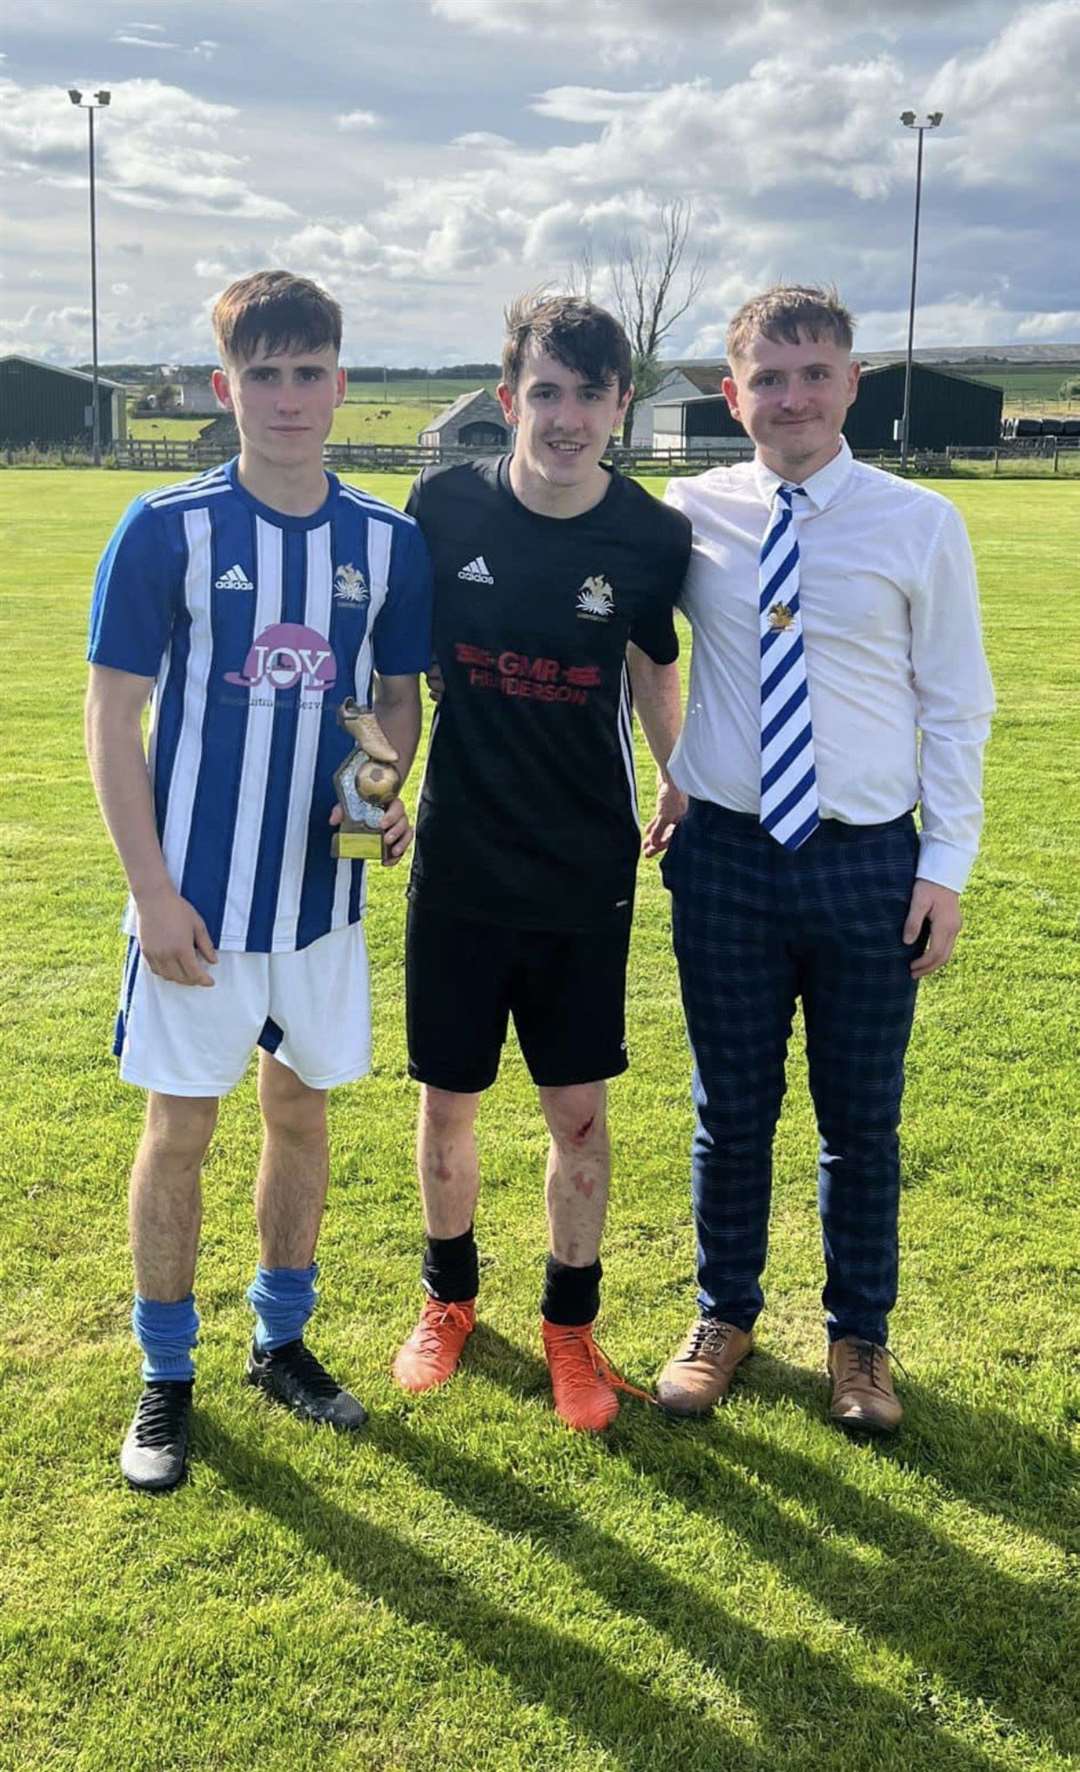 The trophy for most entertaining player went to Lybster's Ross Steven (left), with Stefan's younger brother Andrew Sutherland (centre) and Lybster manager Cameron Mackenzie.